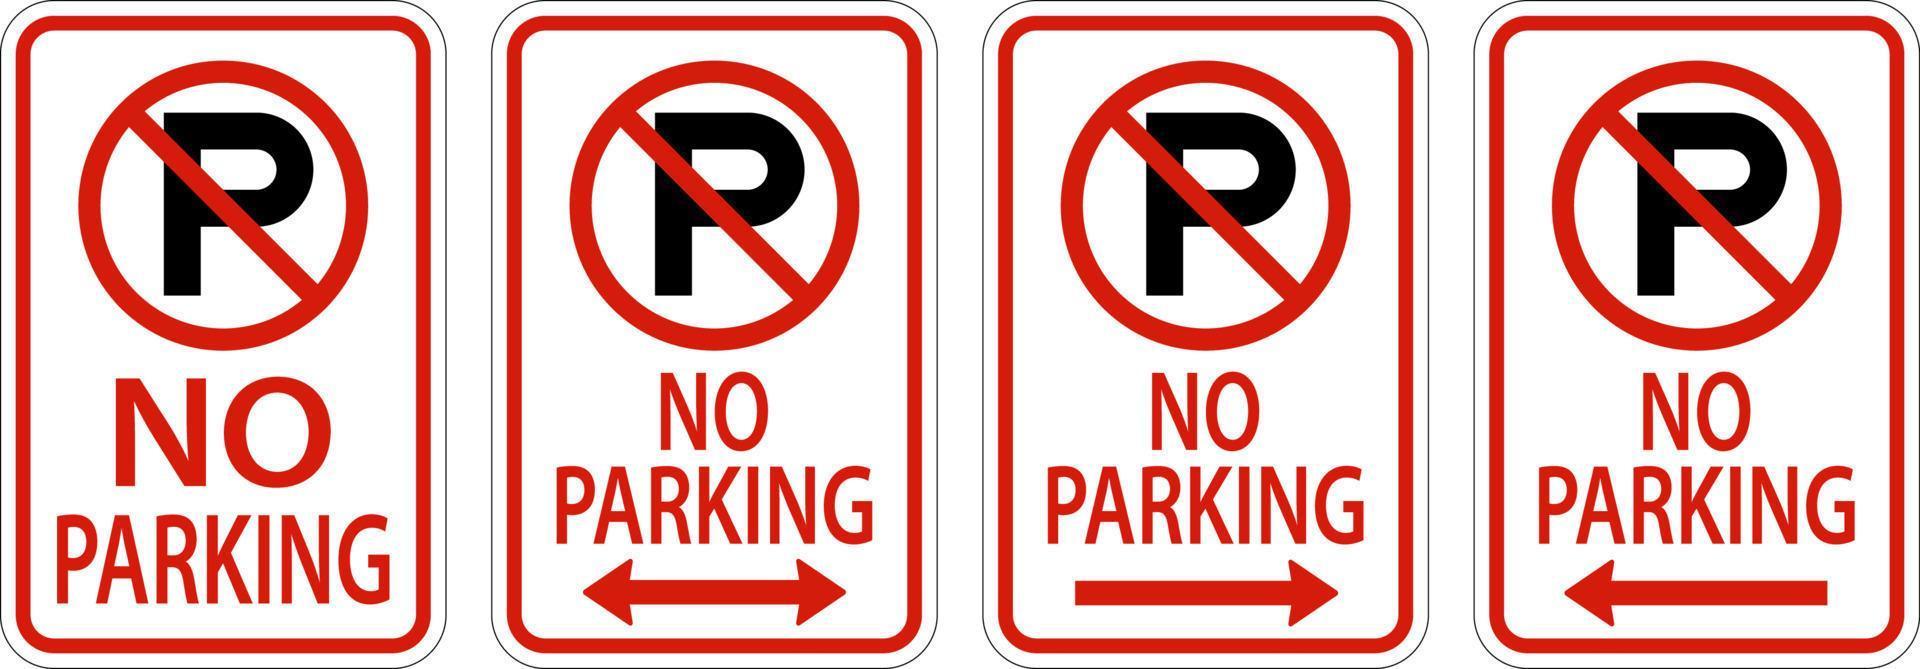 100,000 No parking sign Vector Images